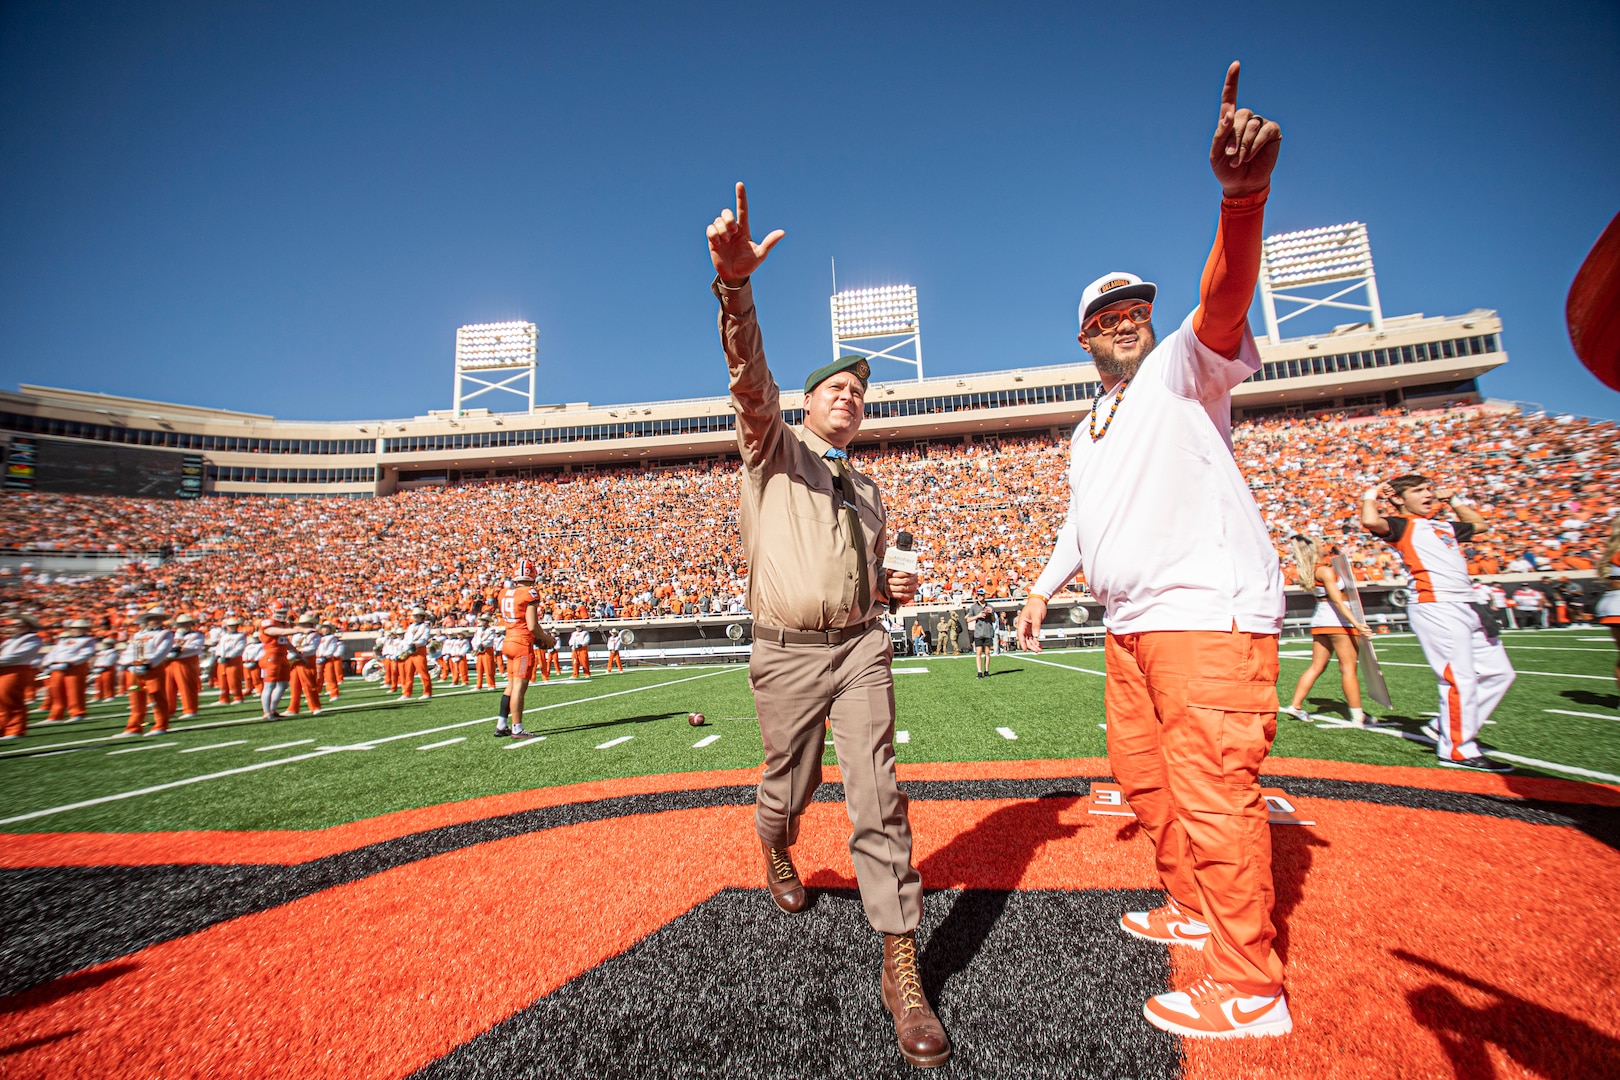 Master Sgt. Earl Plumlee, a Medal of Honor recipient, leads the Orange Power chant alongside Oklahoma State University's Les Thomas Sr. during pre-game activities at the Oklahoma State University homecoming football game in Stillwater, Oklahoma, Oct. 22. 2022. Plumlee, an Oklahoma native, toured his home state Oct. 18-22 and attended the Oklahoma State University homecoming game where he was recognized as the Orange Power VIP of the game. (Oklahoma National Guard photo by Sgt. Anthony Jones)